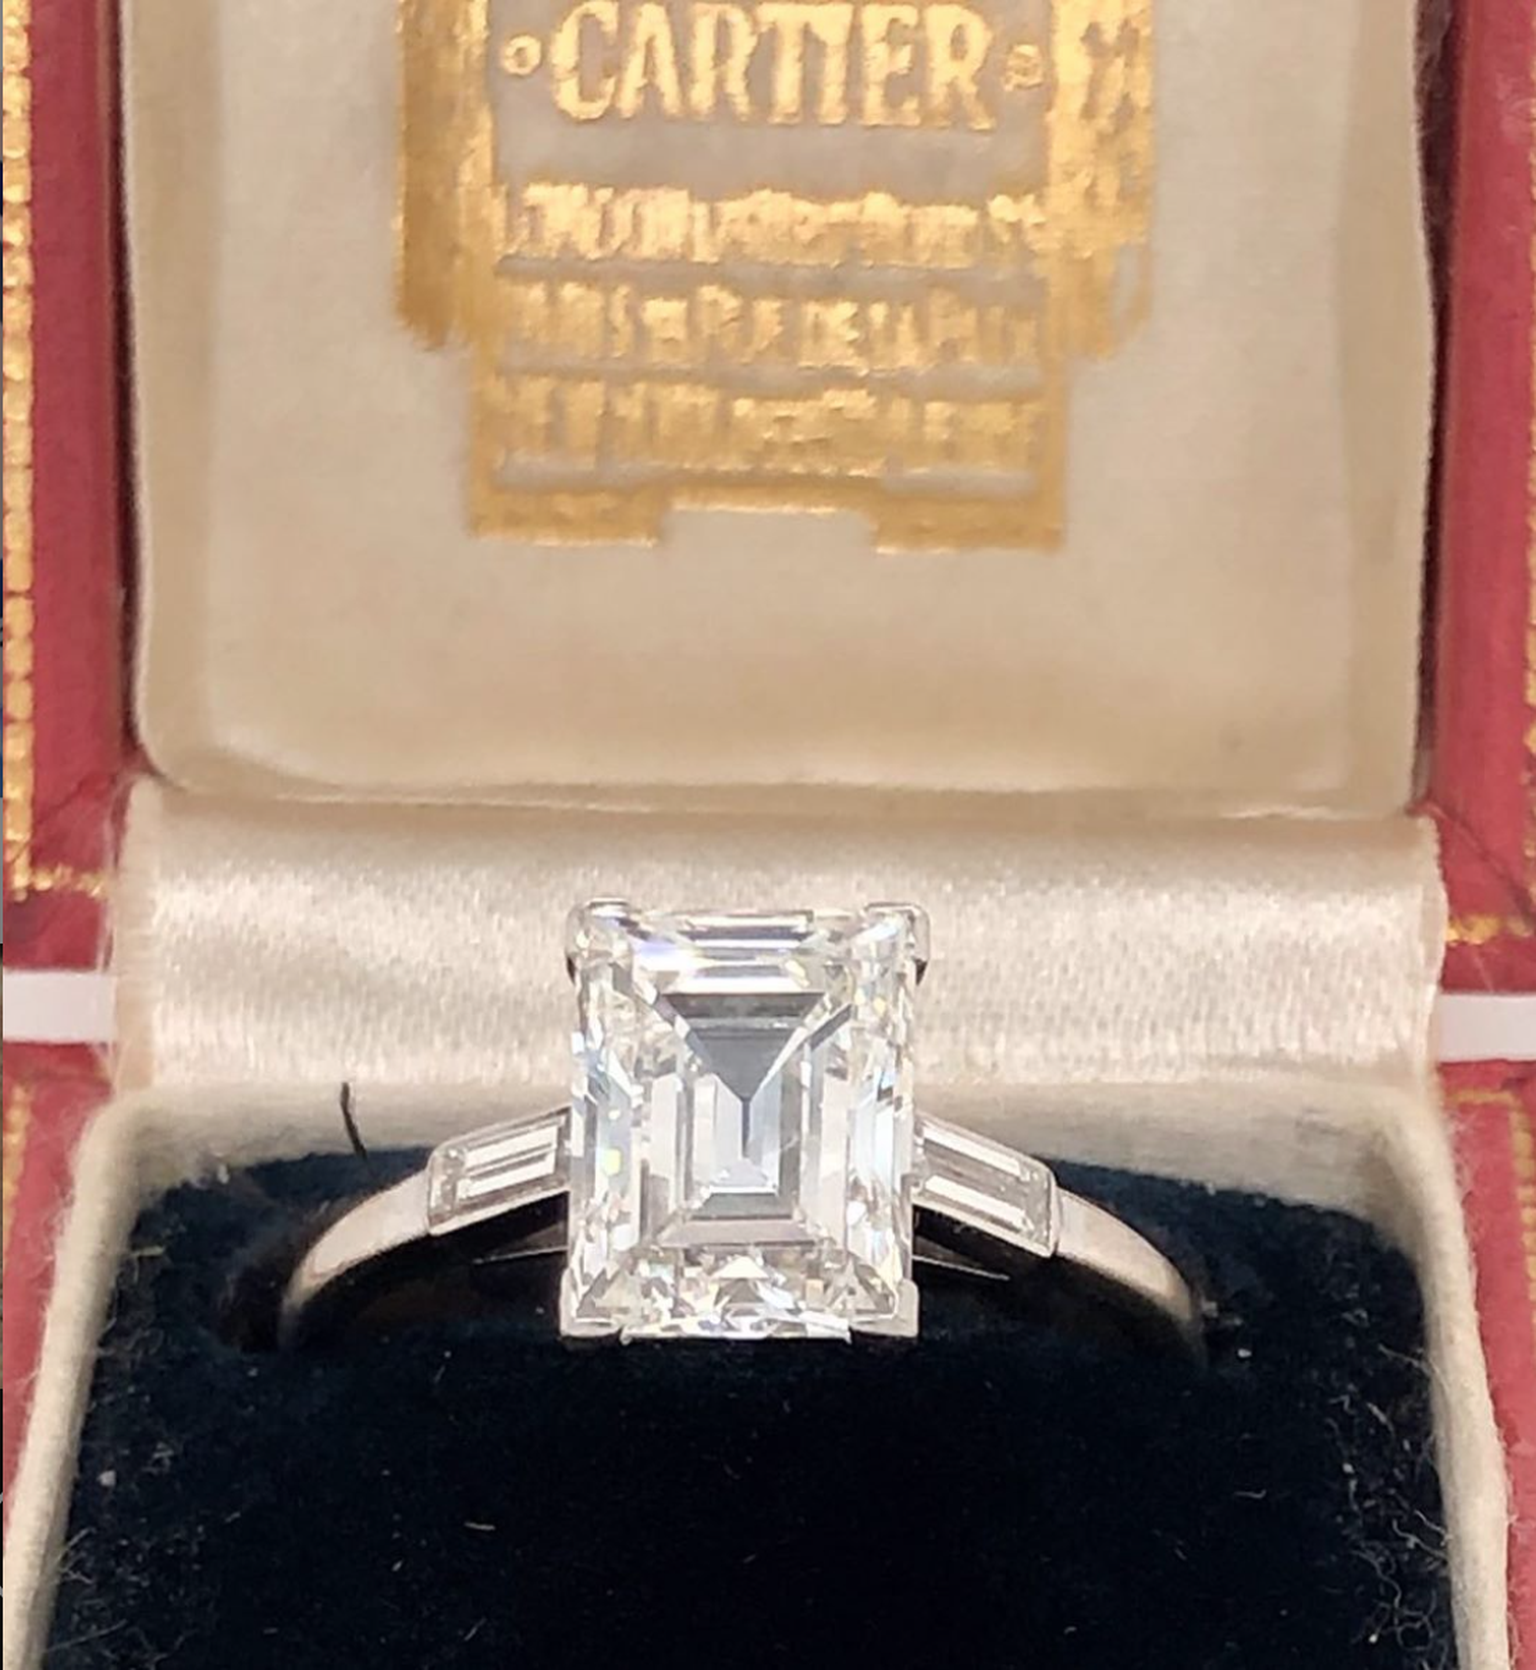 Spicer Warin Cartier diamond engagment ring